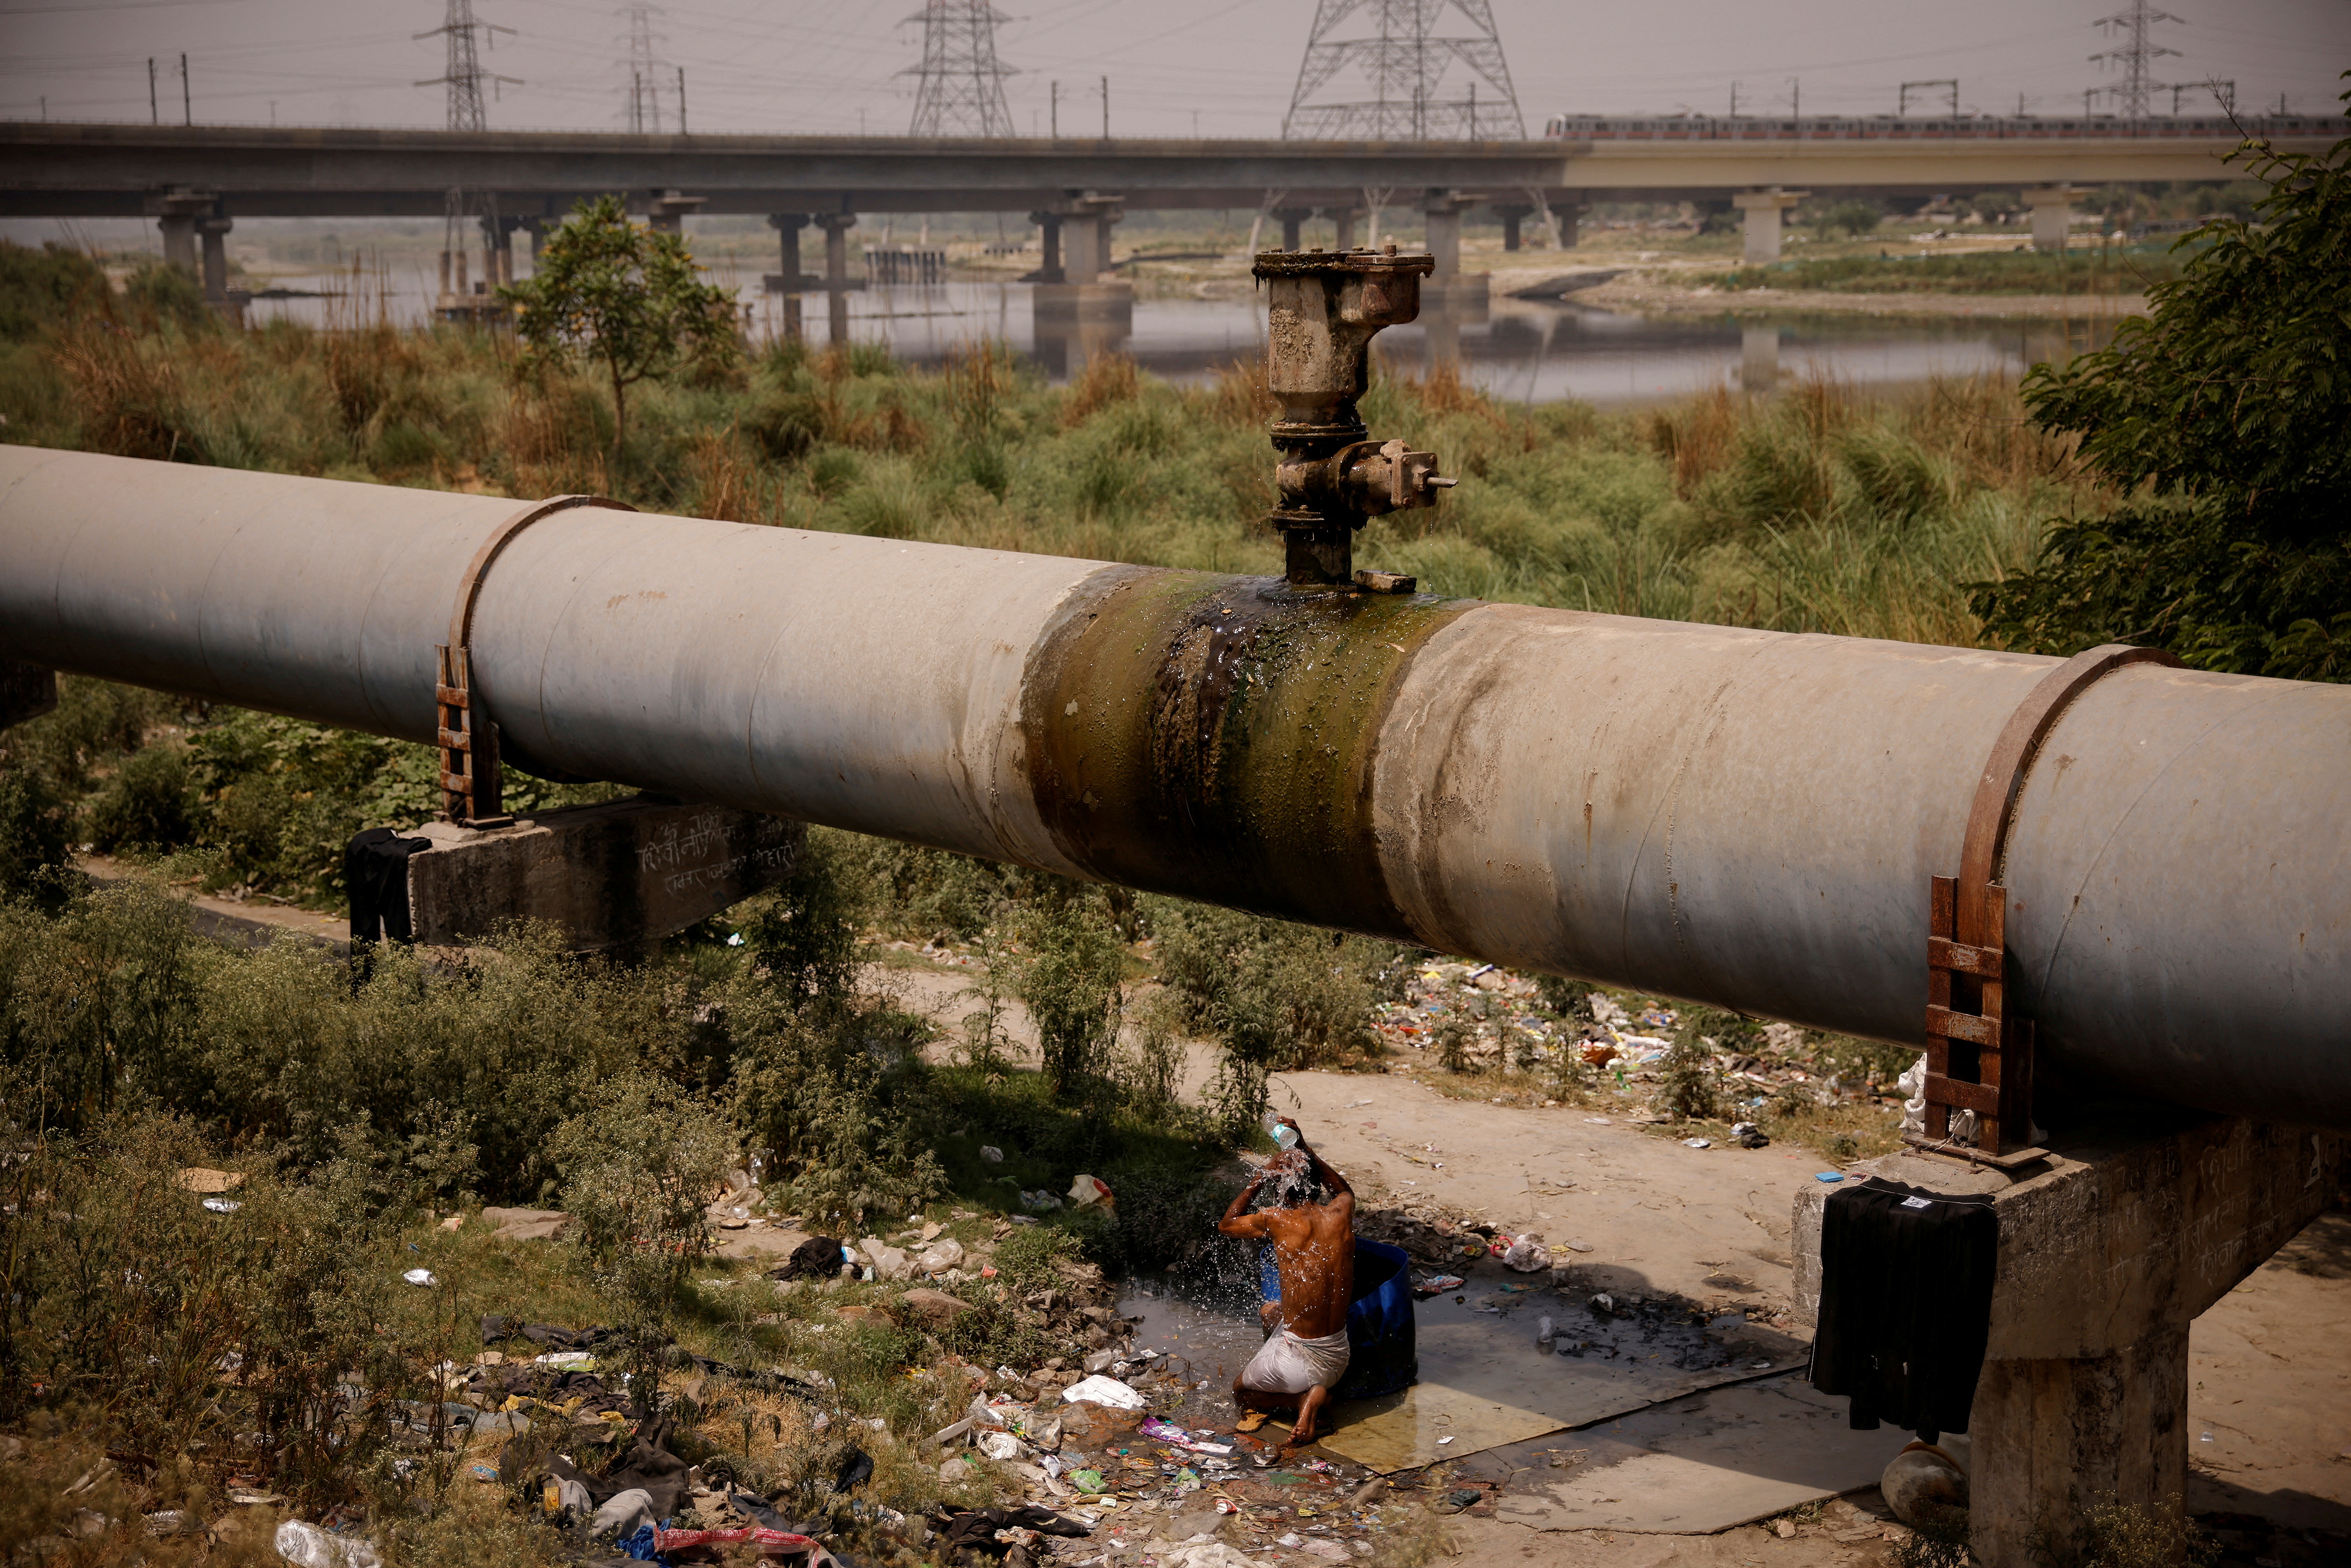 A man bathes under a broken water pipeline on a hot summer day in New Delhi